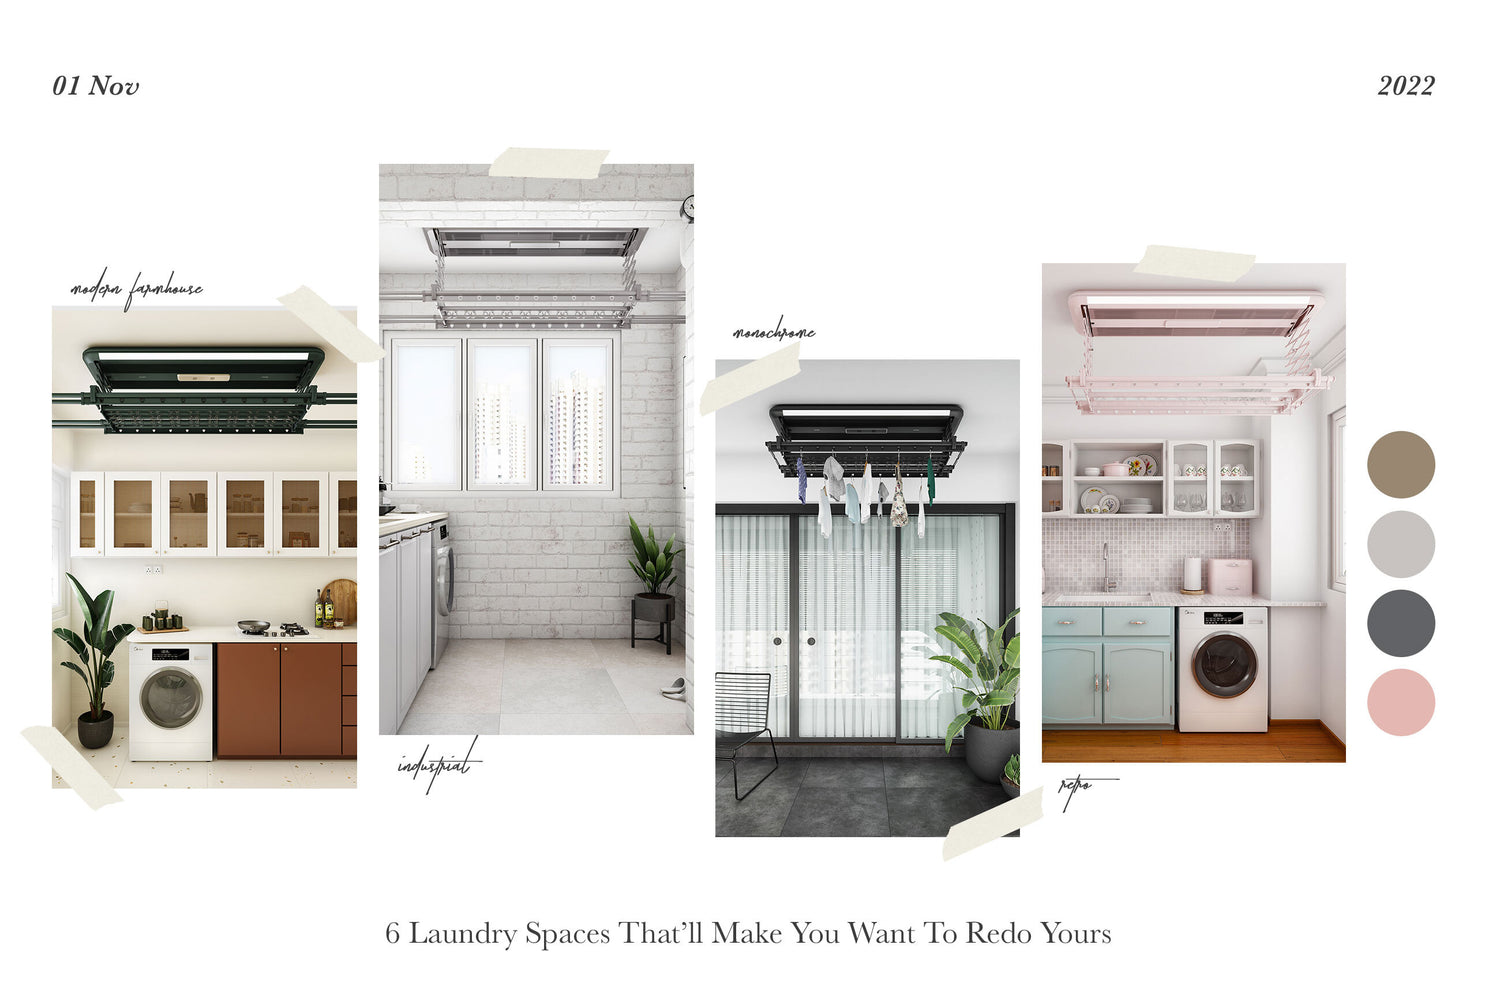 6 Laundry Spaces That’ll Make You Want To Redo Yours